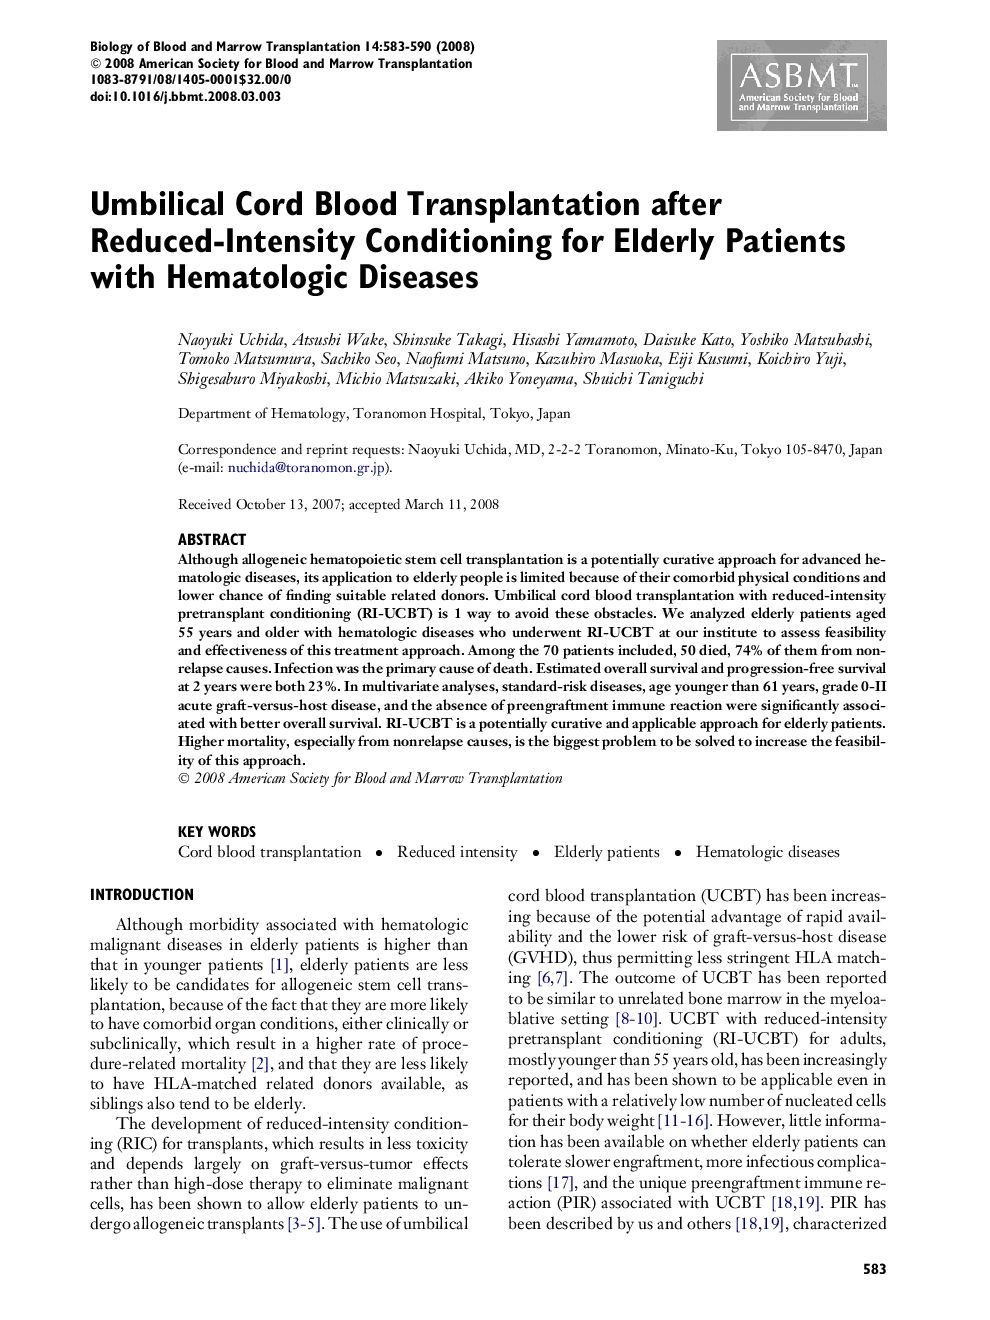 Umbilical Cord Blood Transplantation after Reduced-Intensity Conditioning for Elderly Patients with Hematologic Diseases